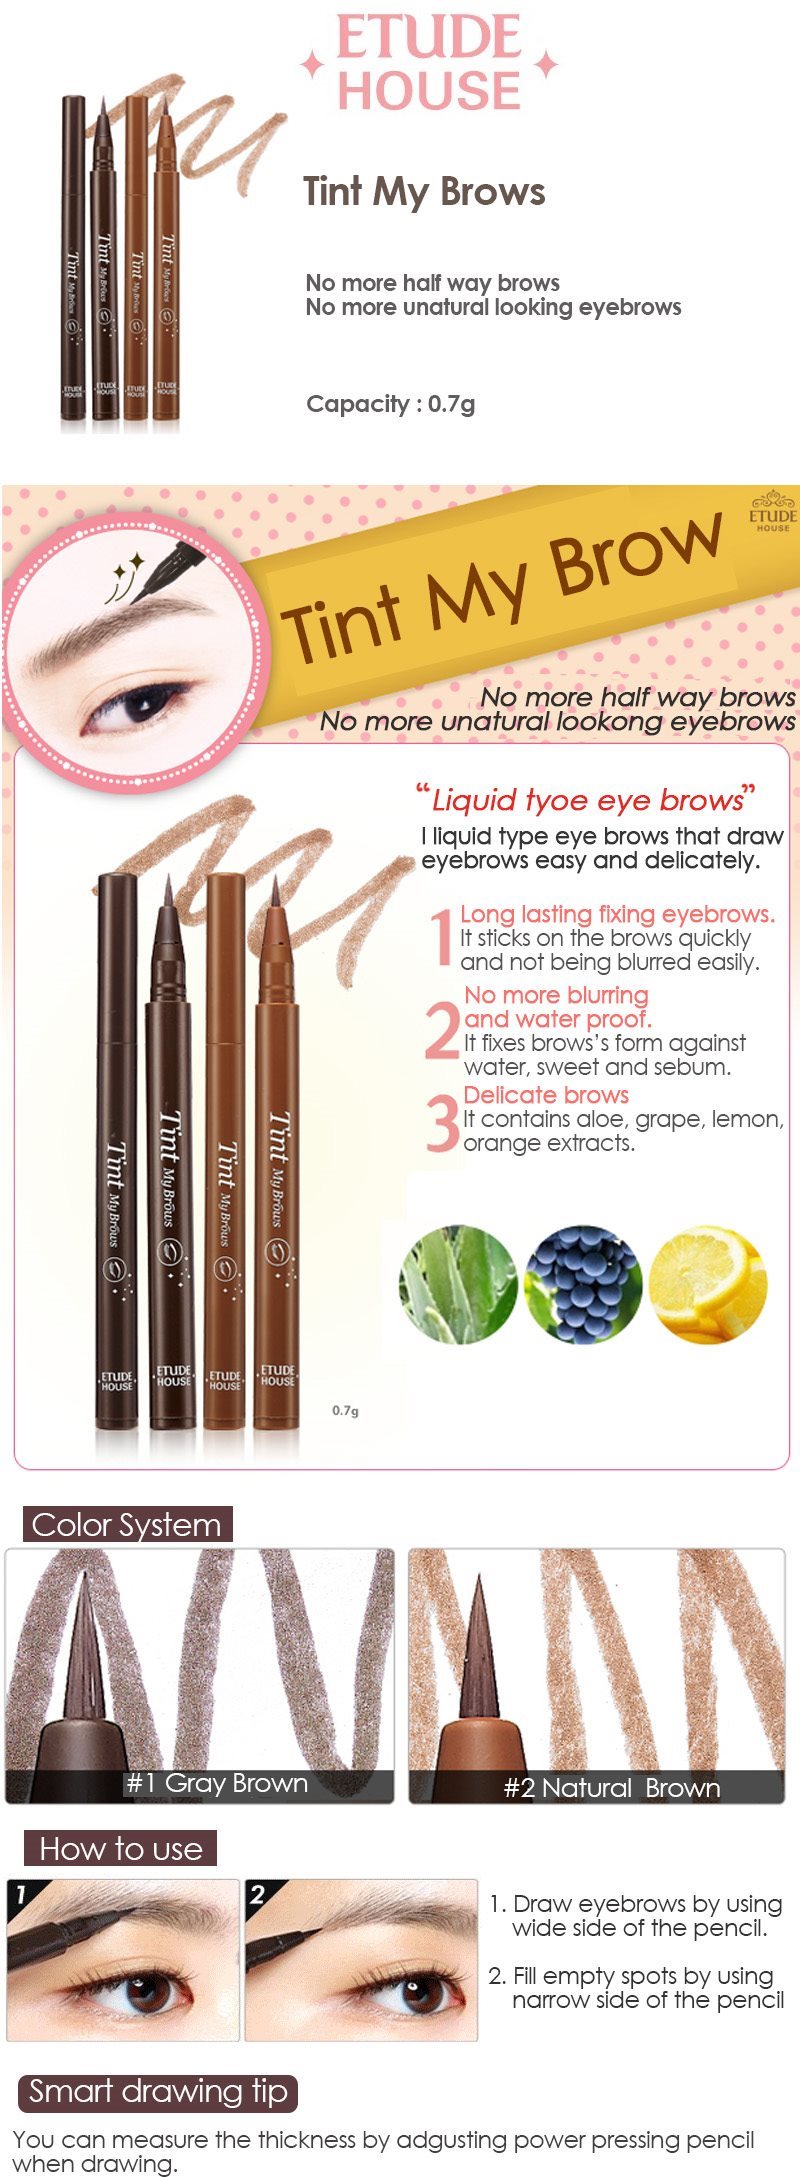 [Etude house] Tint My Brows #02 Natural Brown